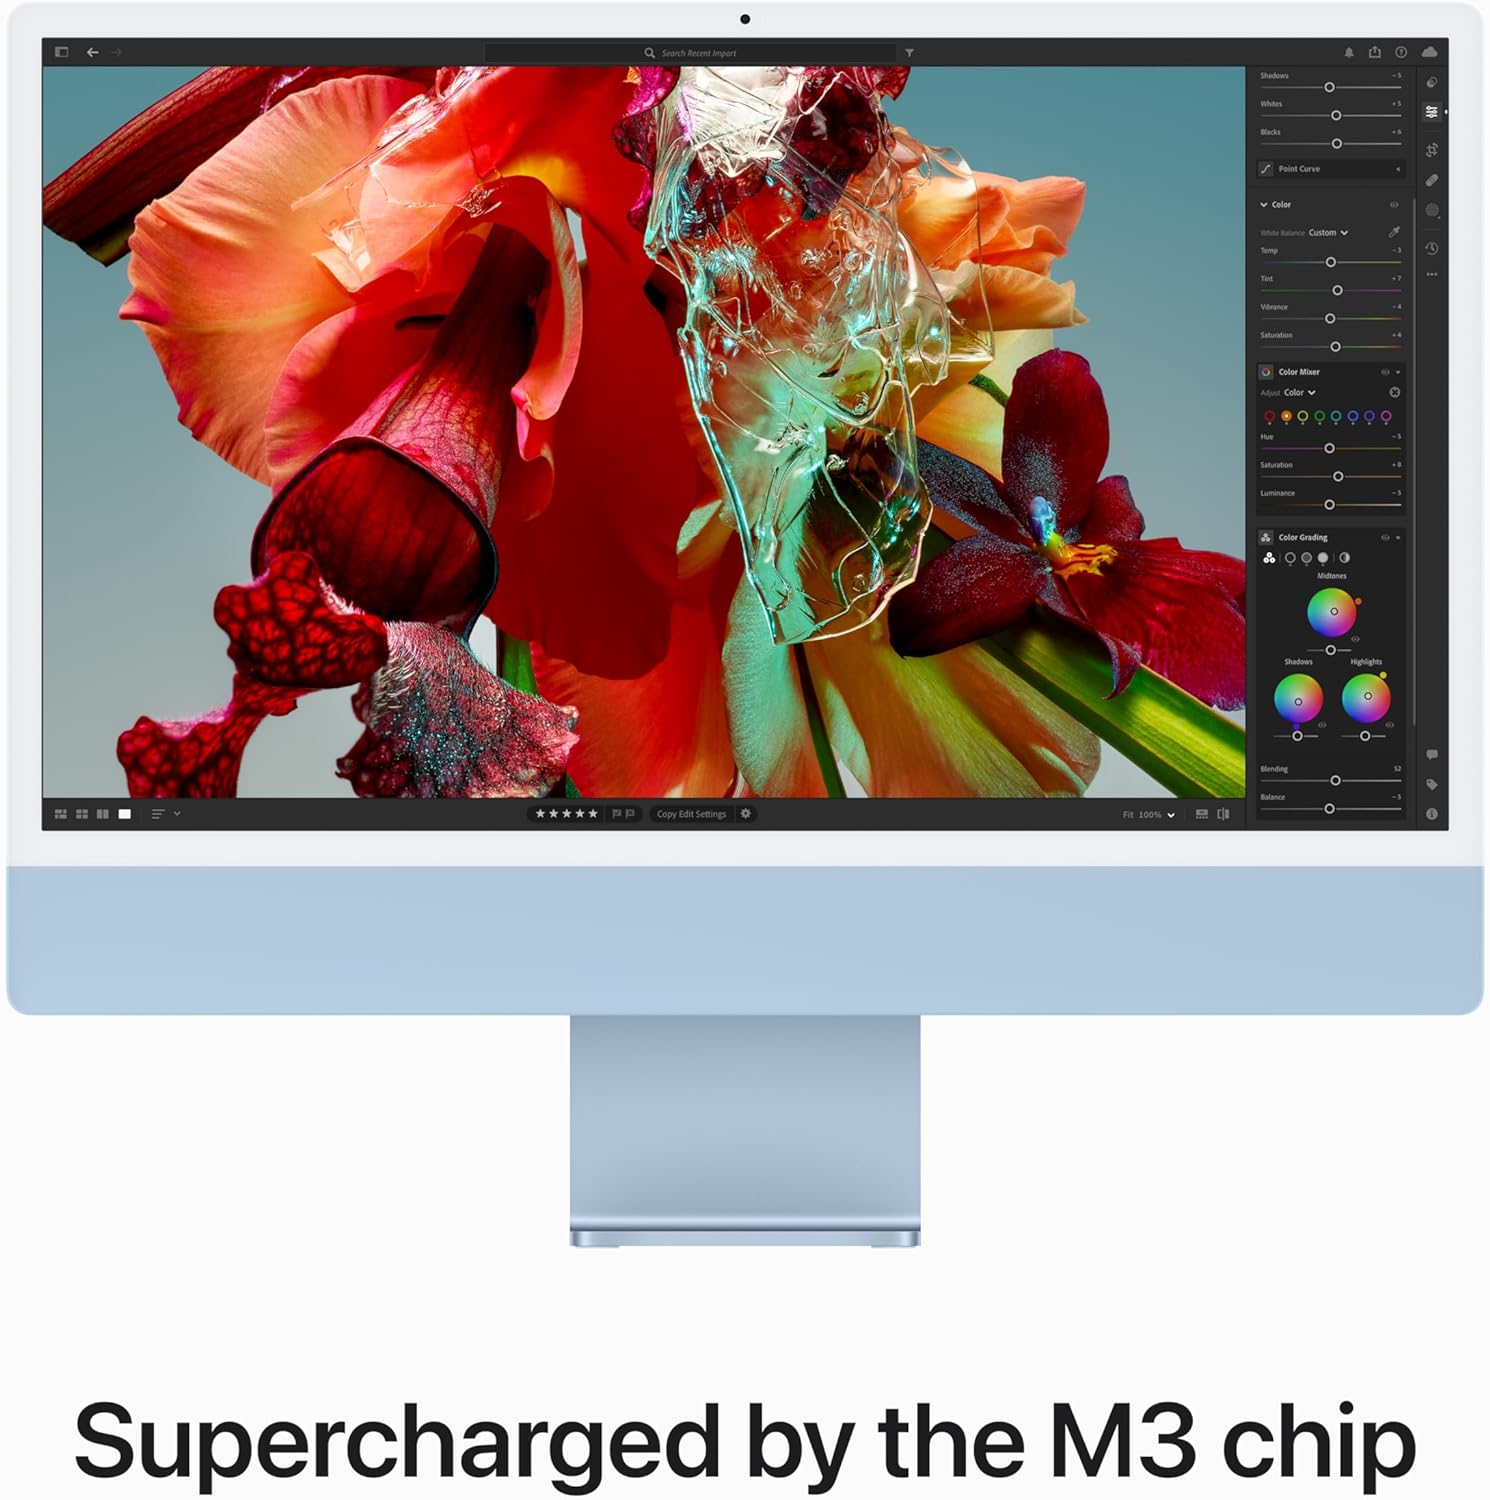 iMac with Advanced Camera and Audio - Crystal-clear visuals and sound quality. 0194253777380